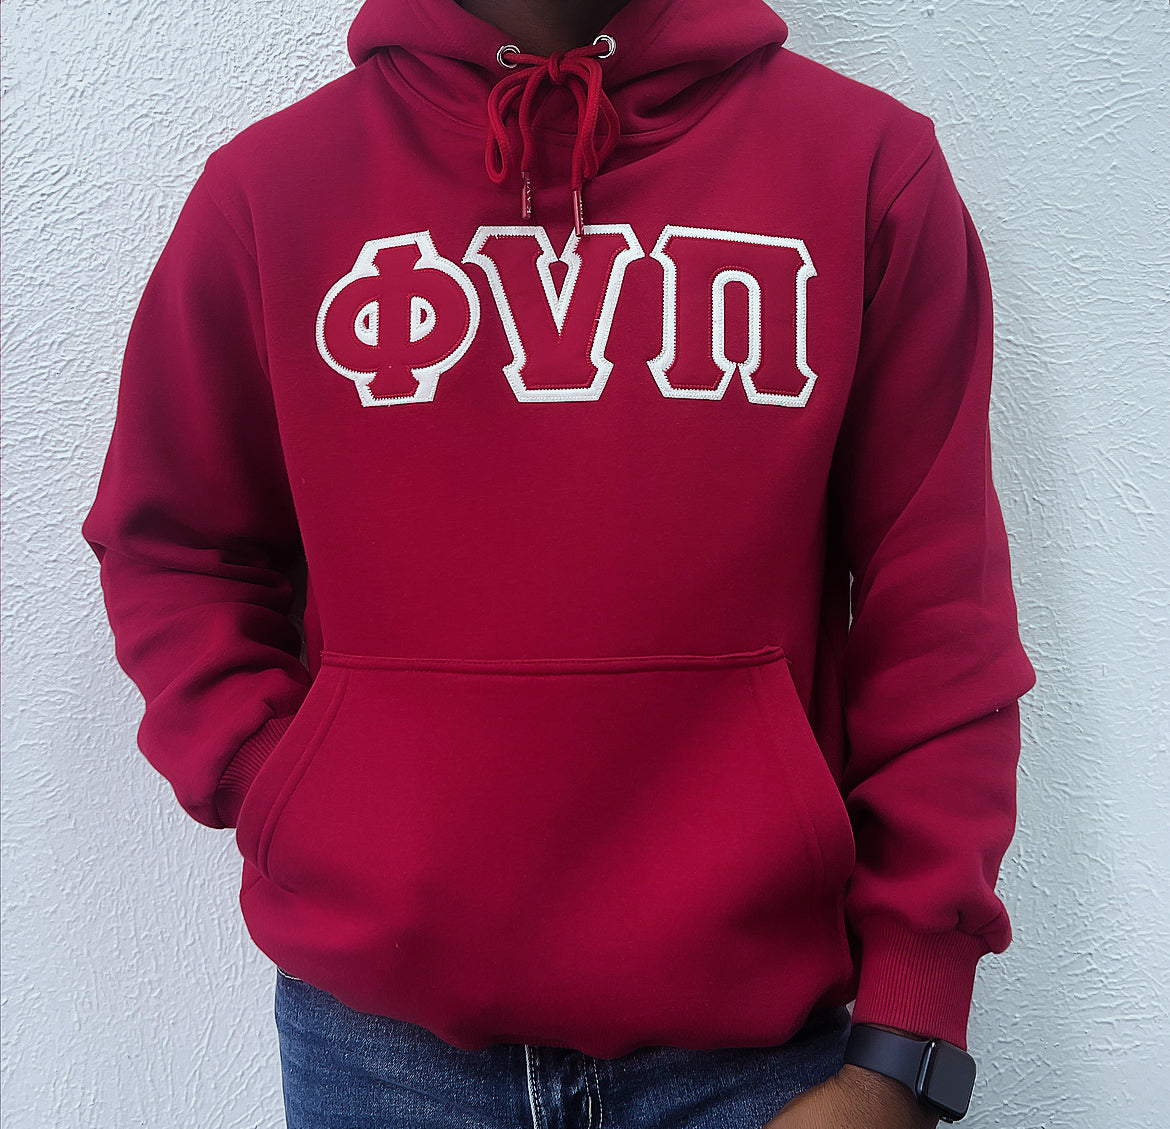 Get ready to show off your Kappa Alpha Psi pride with this stylish dark red hoodie featuring the iconic "Phi Nu Pi" design. Perfect for members of the Fraternity organization, this collectible item is a must-have for any Nupe.

Crafted with high-quality materials, this hoodie is not only comfortable to wear but also durable enough to last for years to come. Ideal for pairing with jeans on a casual day, it is a versatile addition to any wardrobe. Don't miss out on the chance to own this unique piece of histo